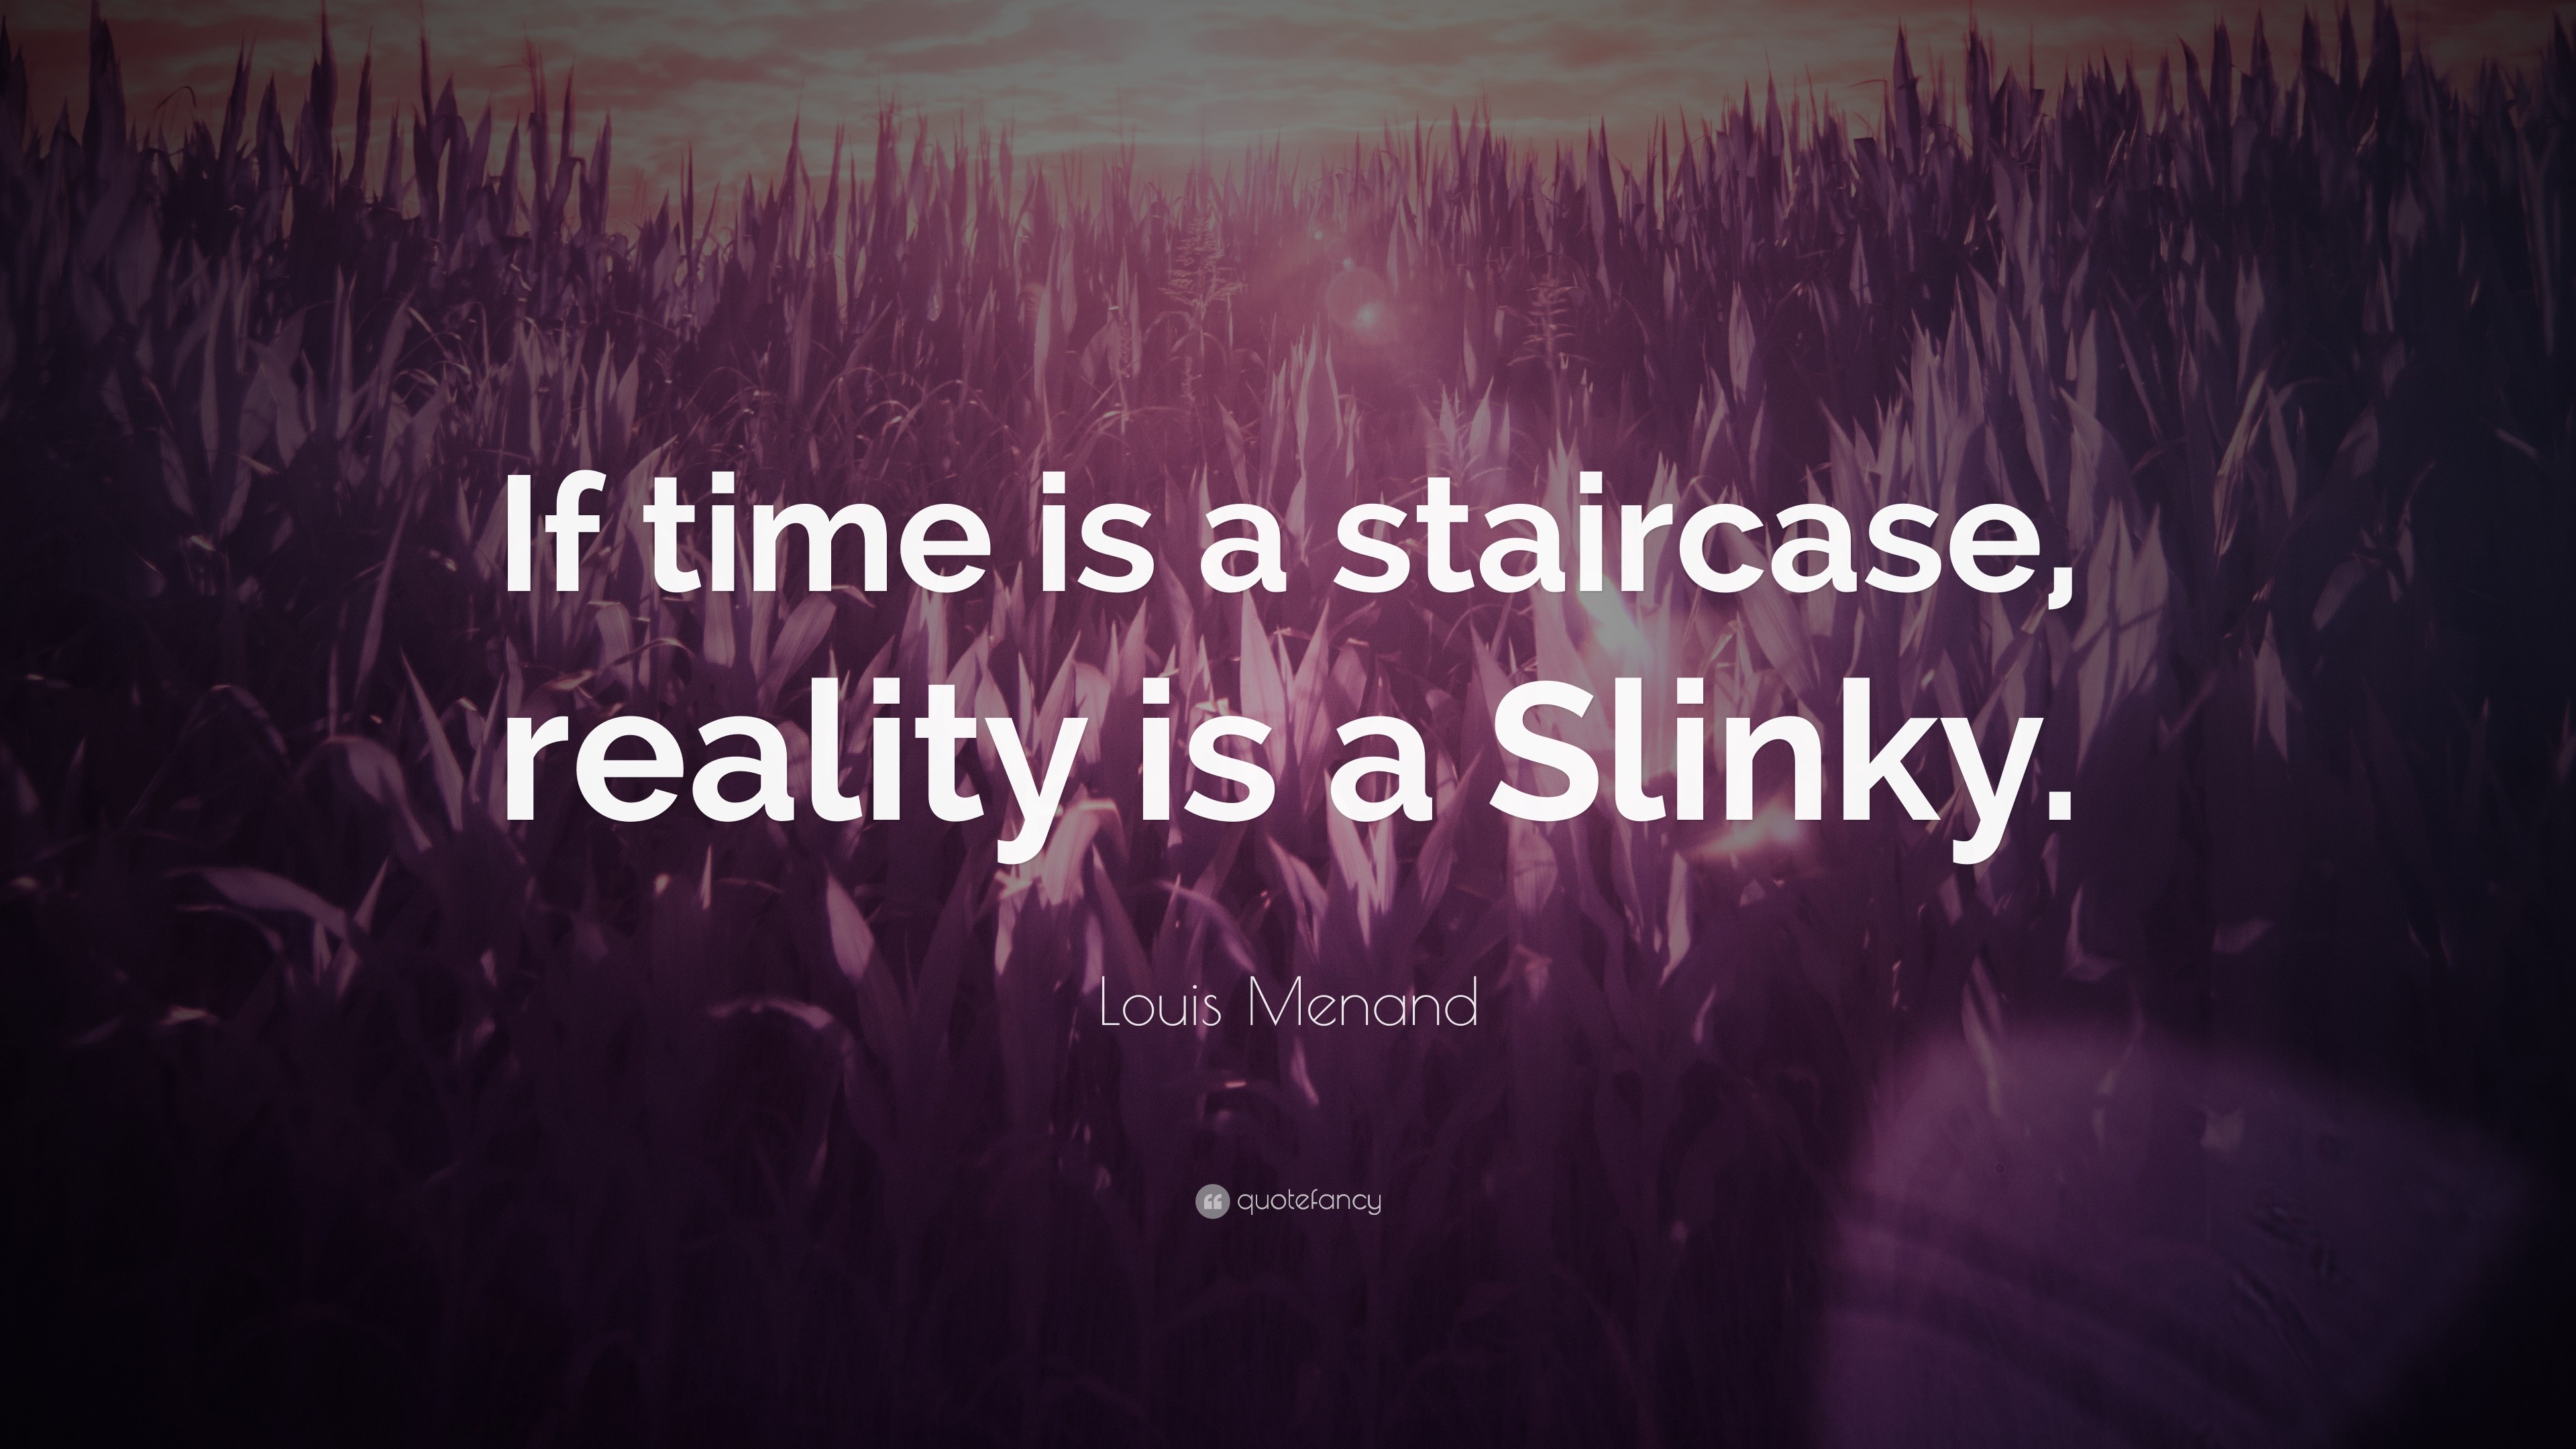 Louis Menand Quote: “If time is a staircase, reality is a Slinky.” (10 wallpapers) - Quotefancy